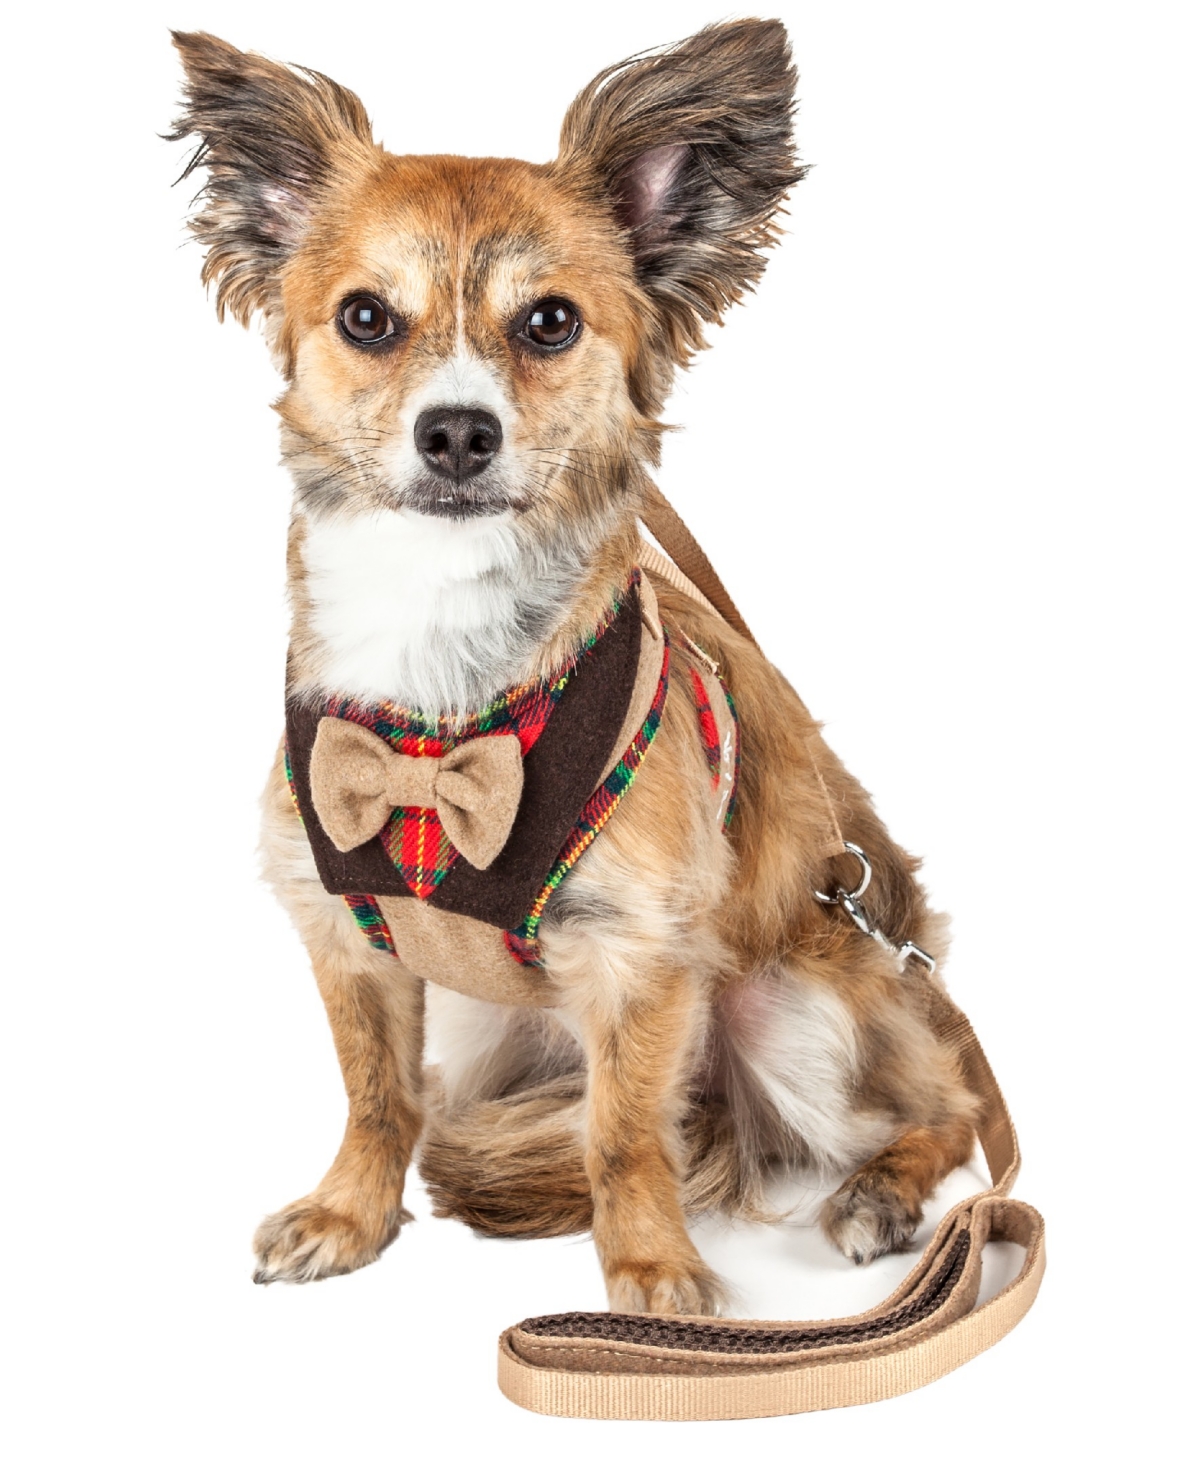 Luxe 'Dapperbone' 2-in-1 Dog Harness Leash with Fashion Bowtie - Brown